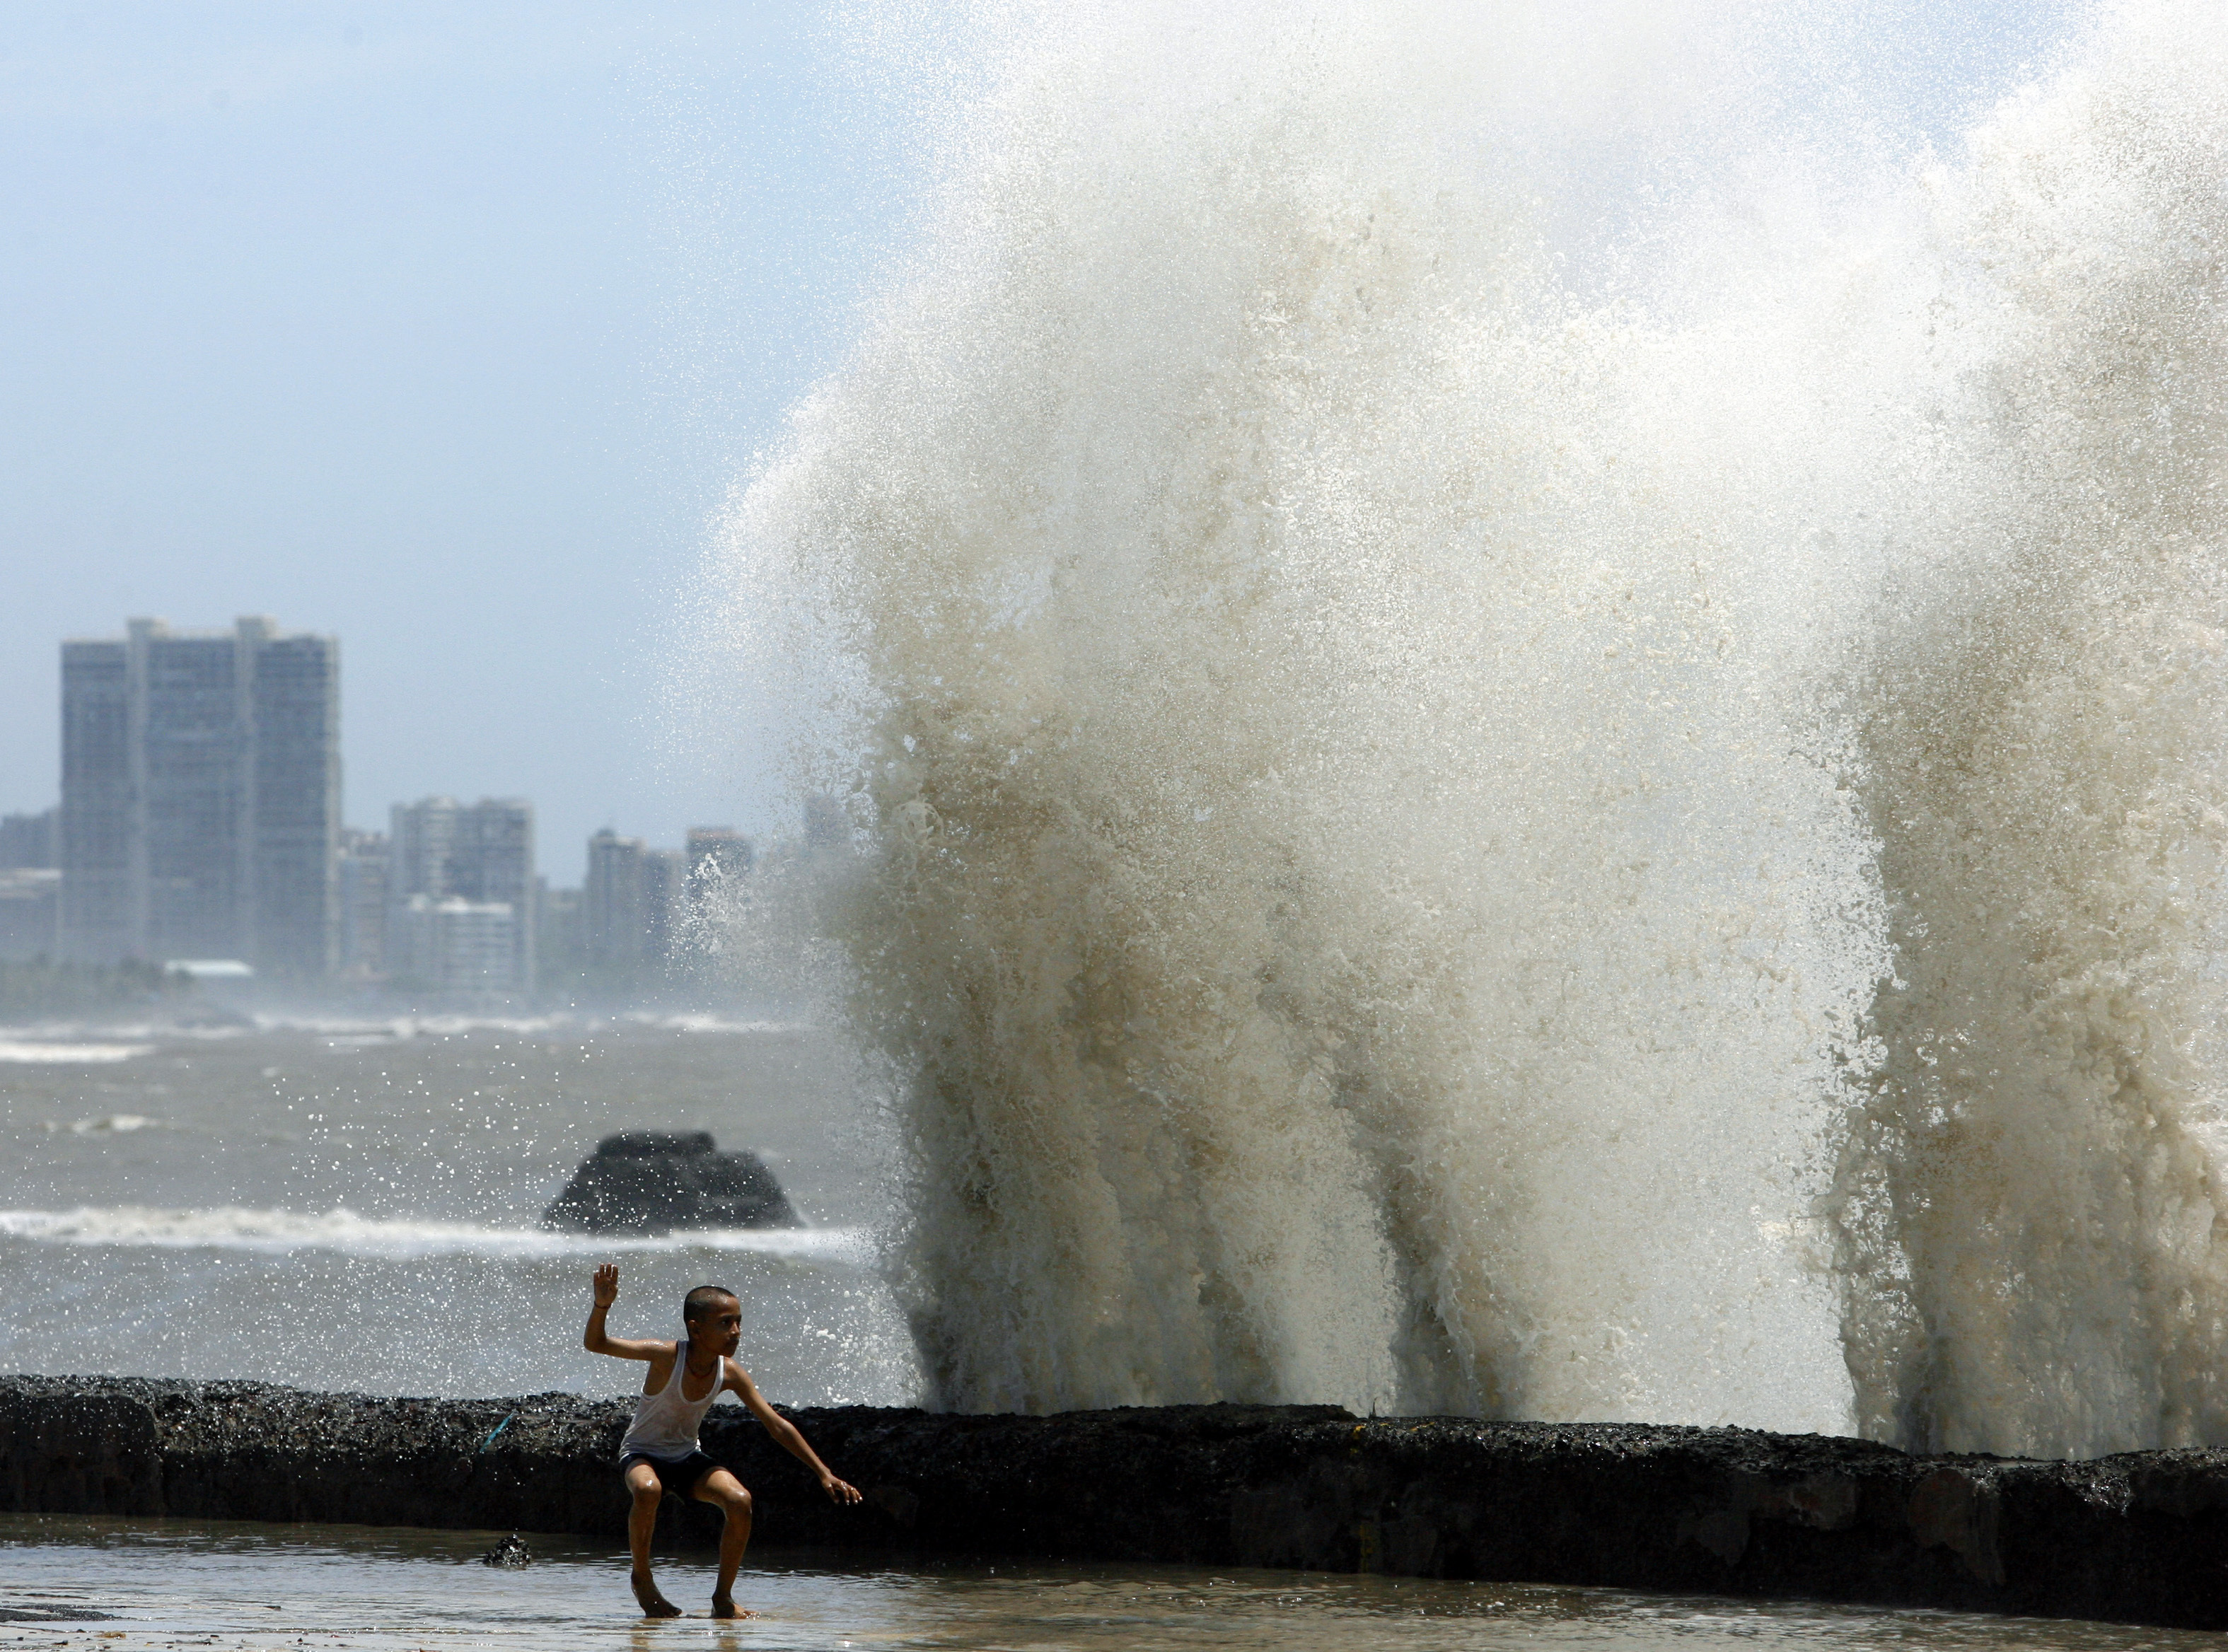 A boy plays under large waves from the Arabian sea crashing against a seawall in Mumbai